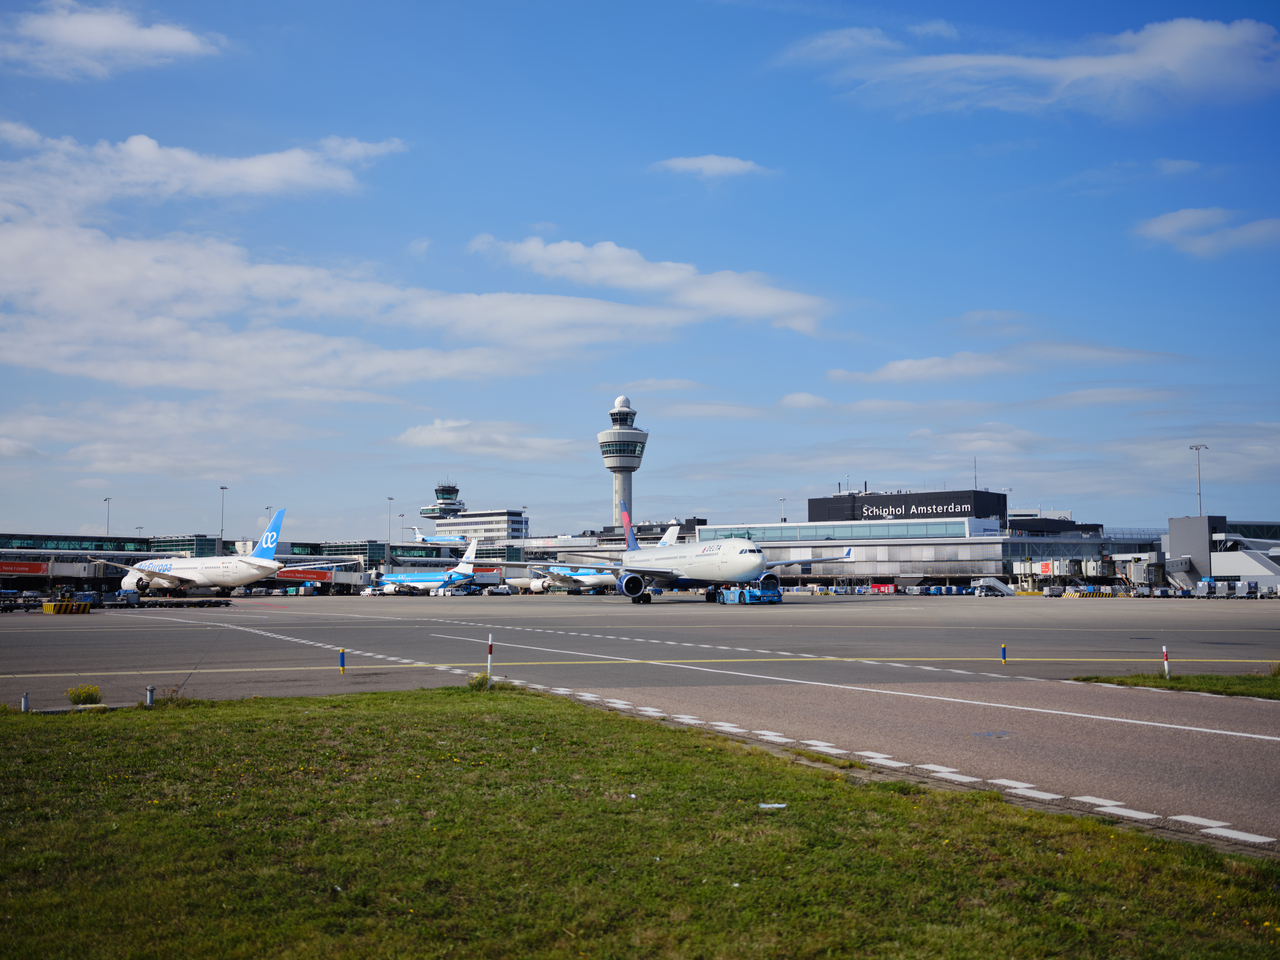 A view across Amsterdam Schiphol Airport